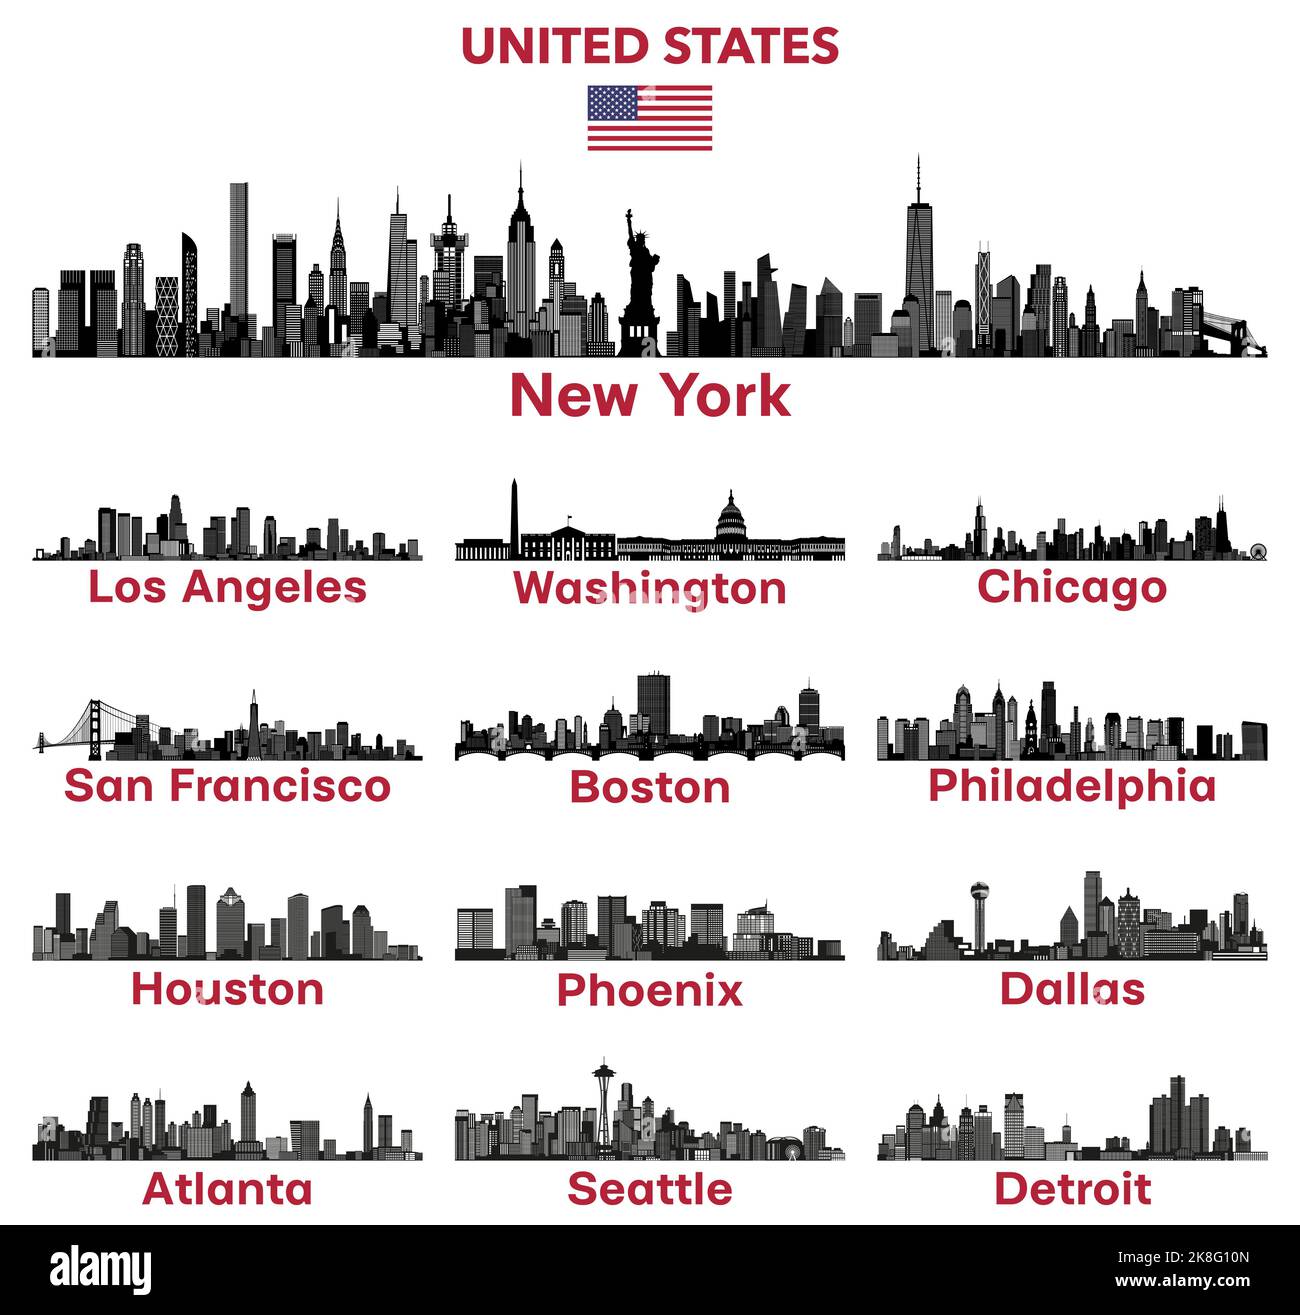 United States cities skylines silhouettes vector illustrations Stock Vector